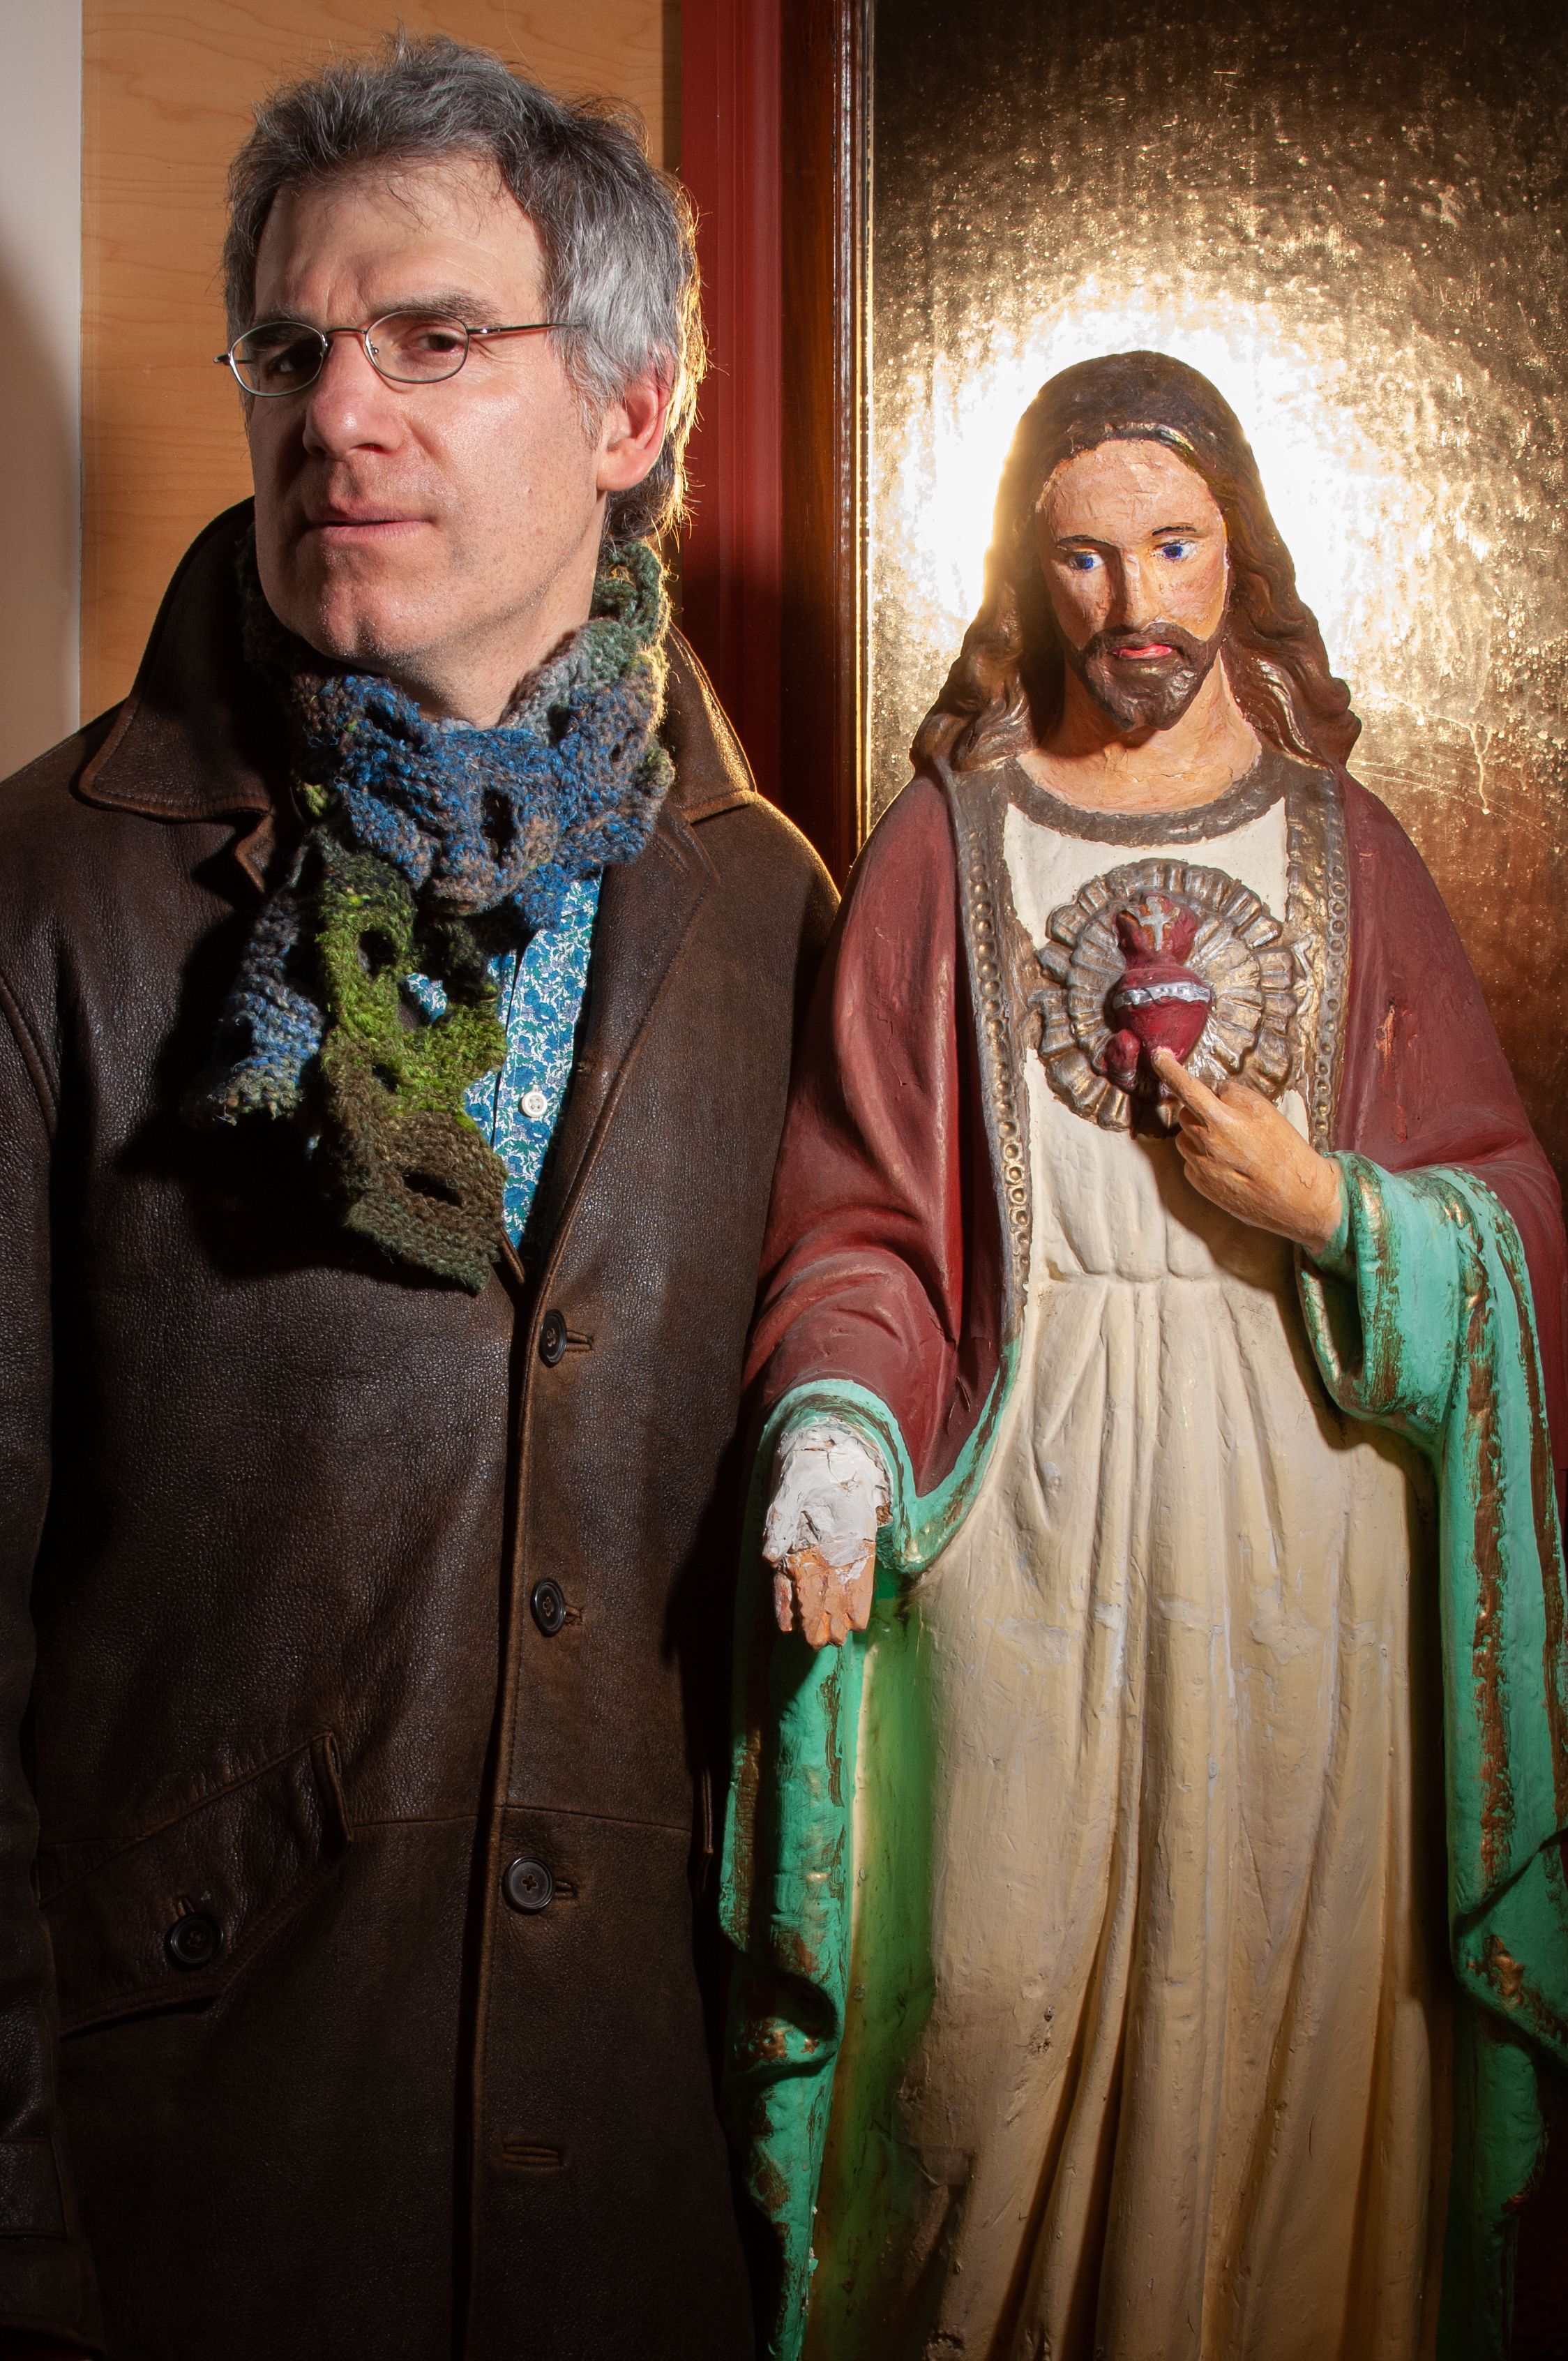 Man in leather jacket and glasses stands next to statue of Jesus